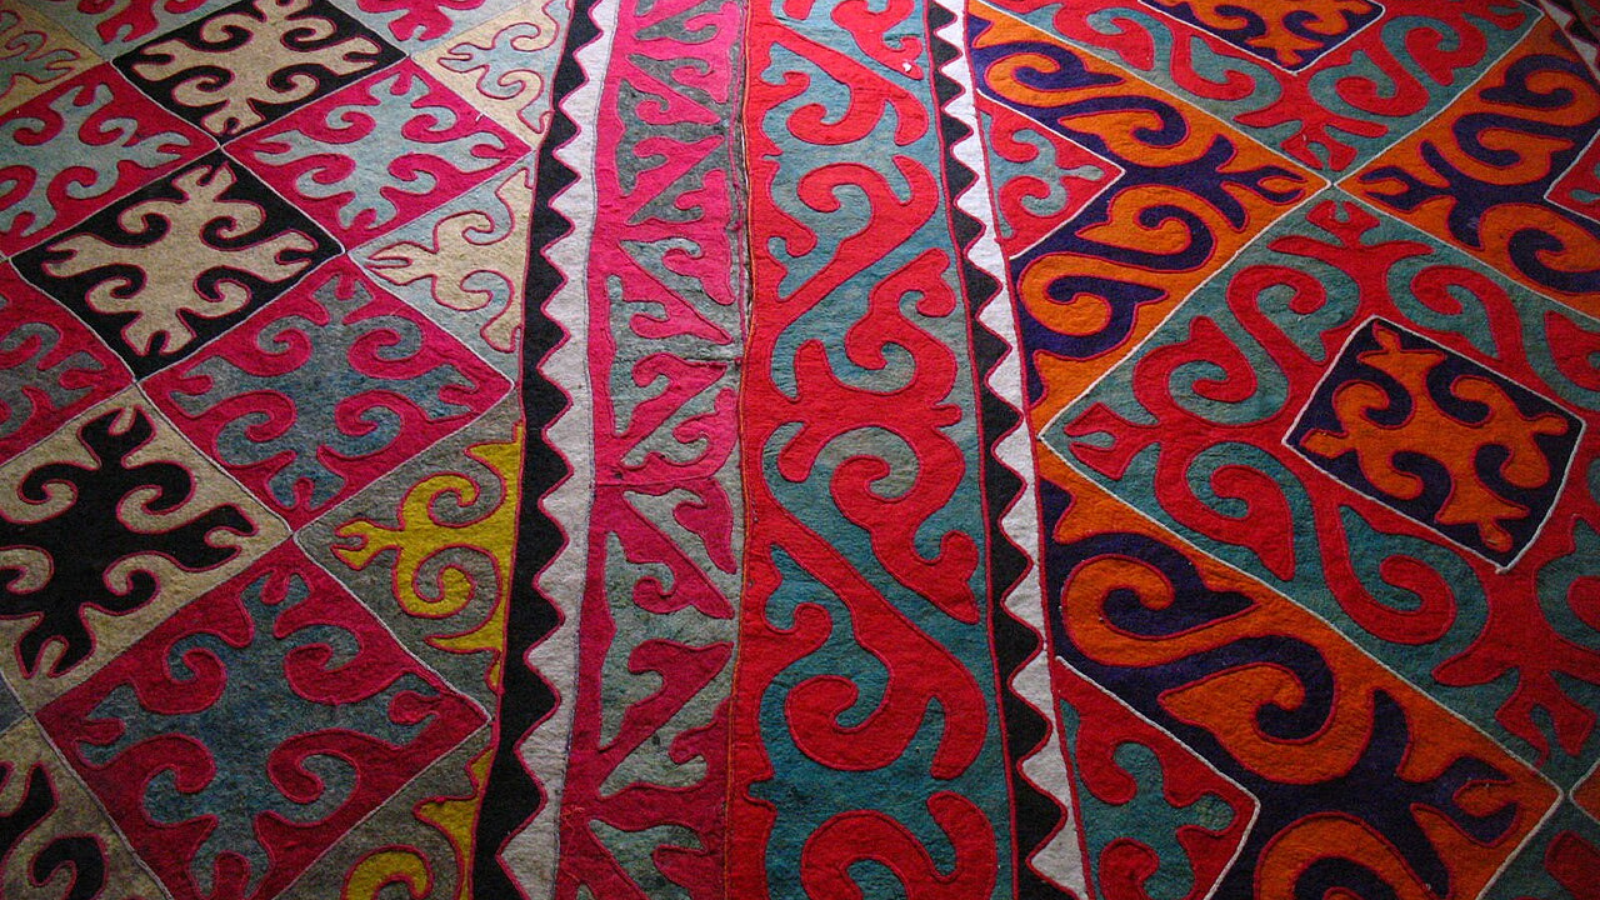 A colorful shyrdak, a type of rug, with geometric square and diamond patterns filled with spiraling and curvy abstract shapes in bright pink, red, navy, yellow, teal and light and dark blues.